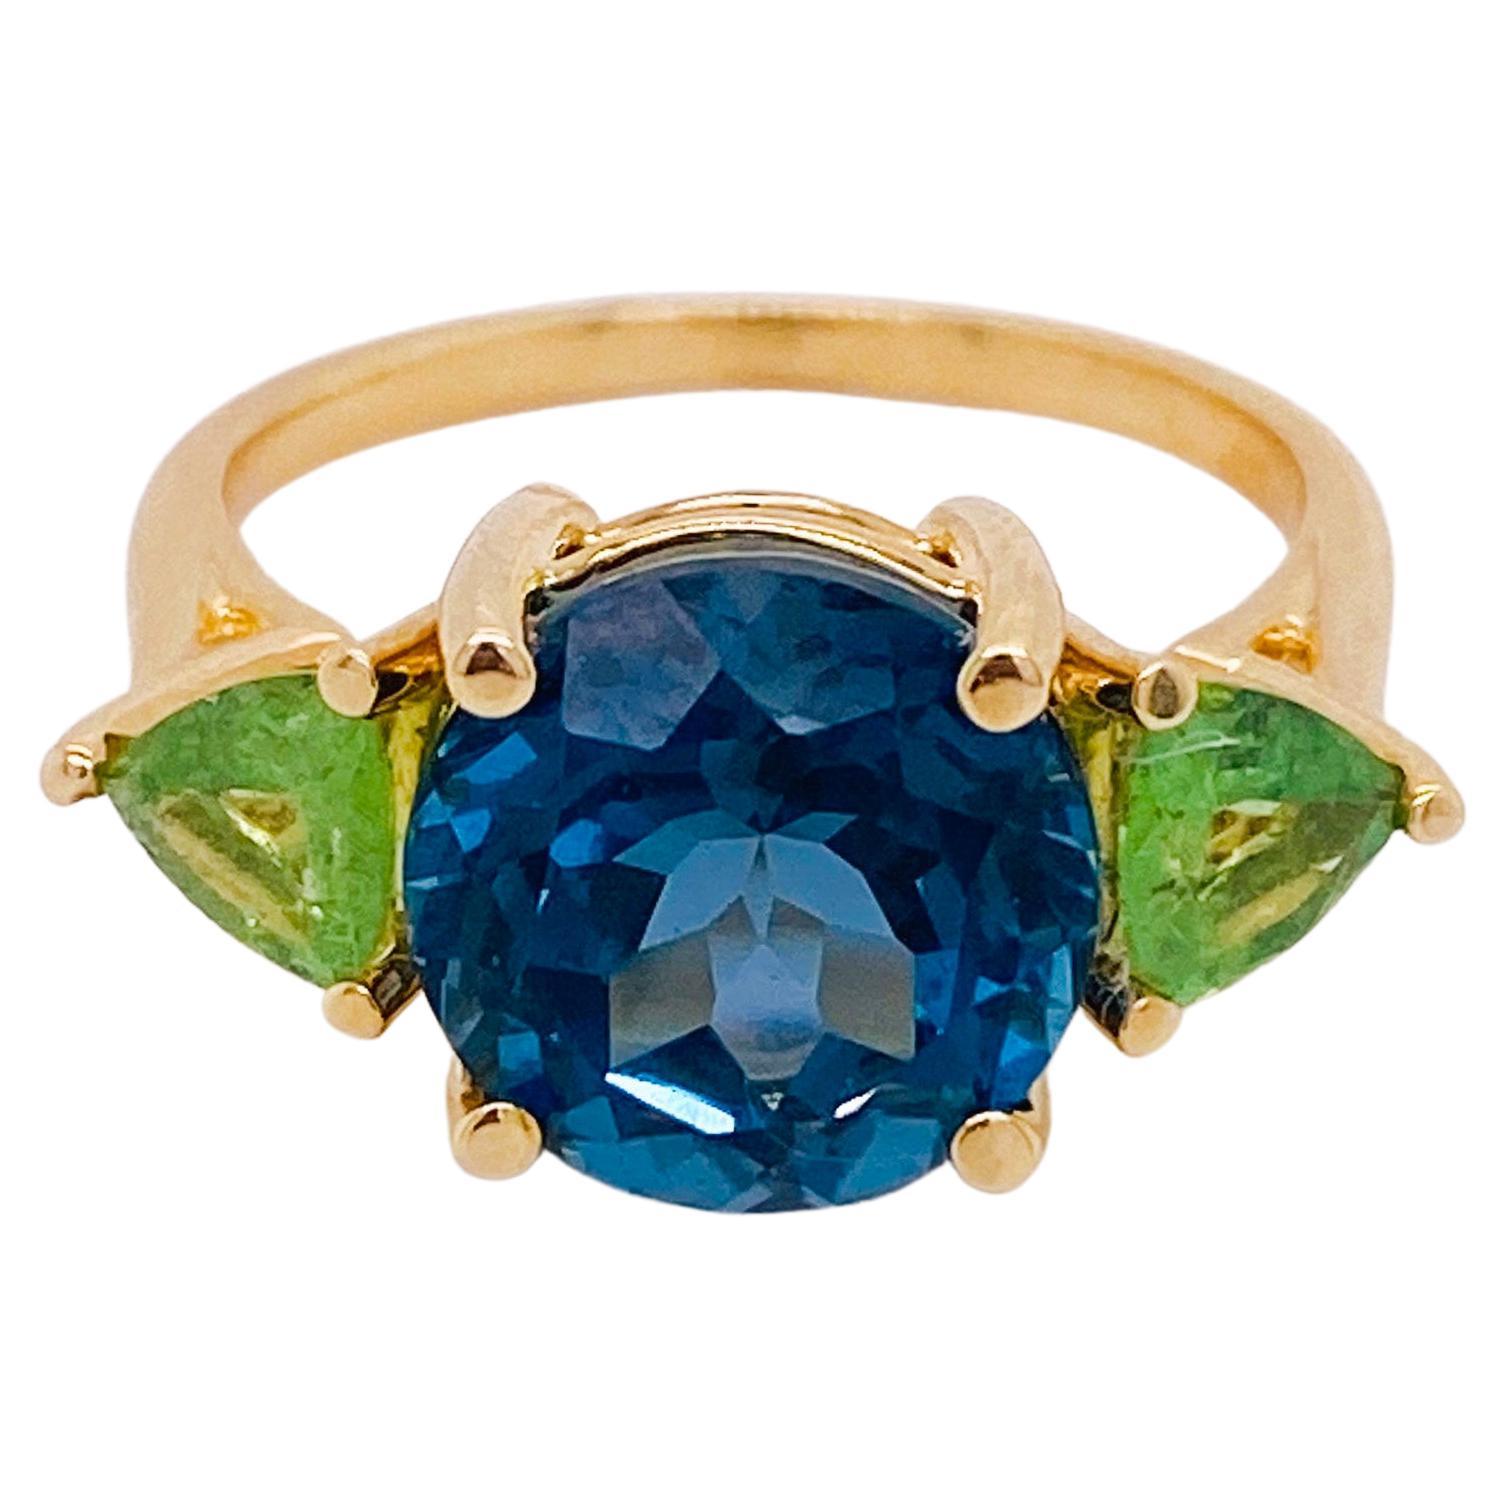 4.75 Carats London Blue Topaz and Peridot Three-Stone Ring in 14KYG, Ocean Blue For Sale